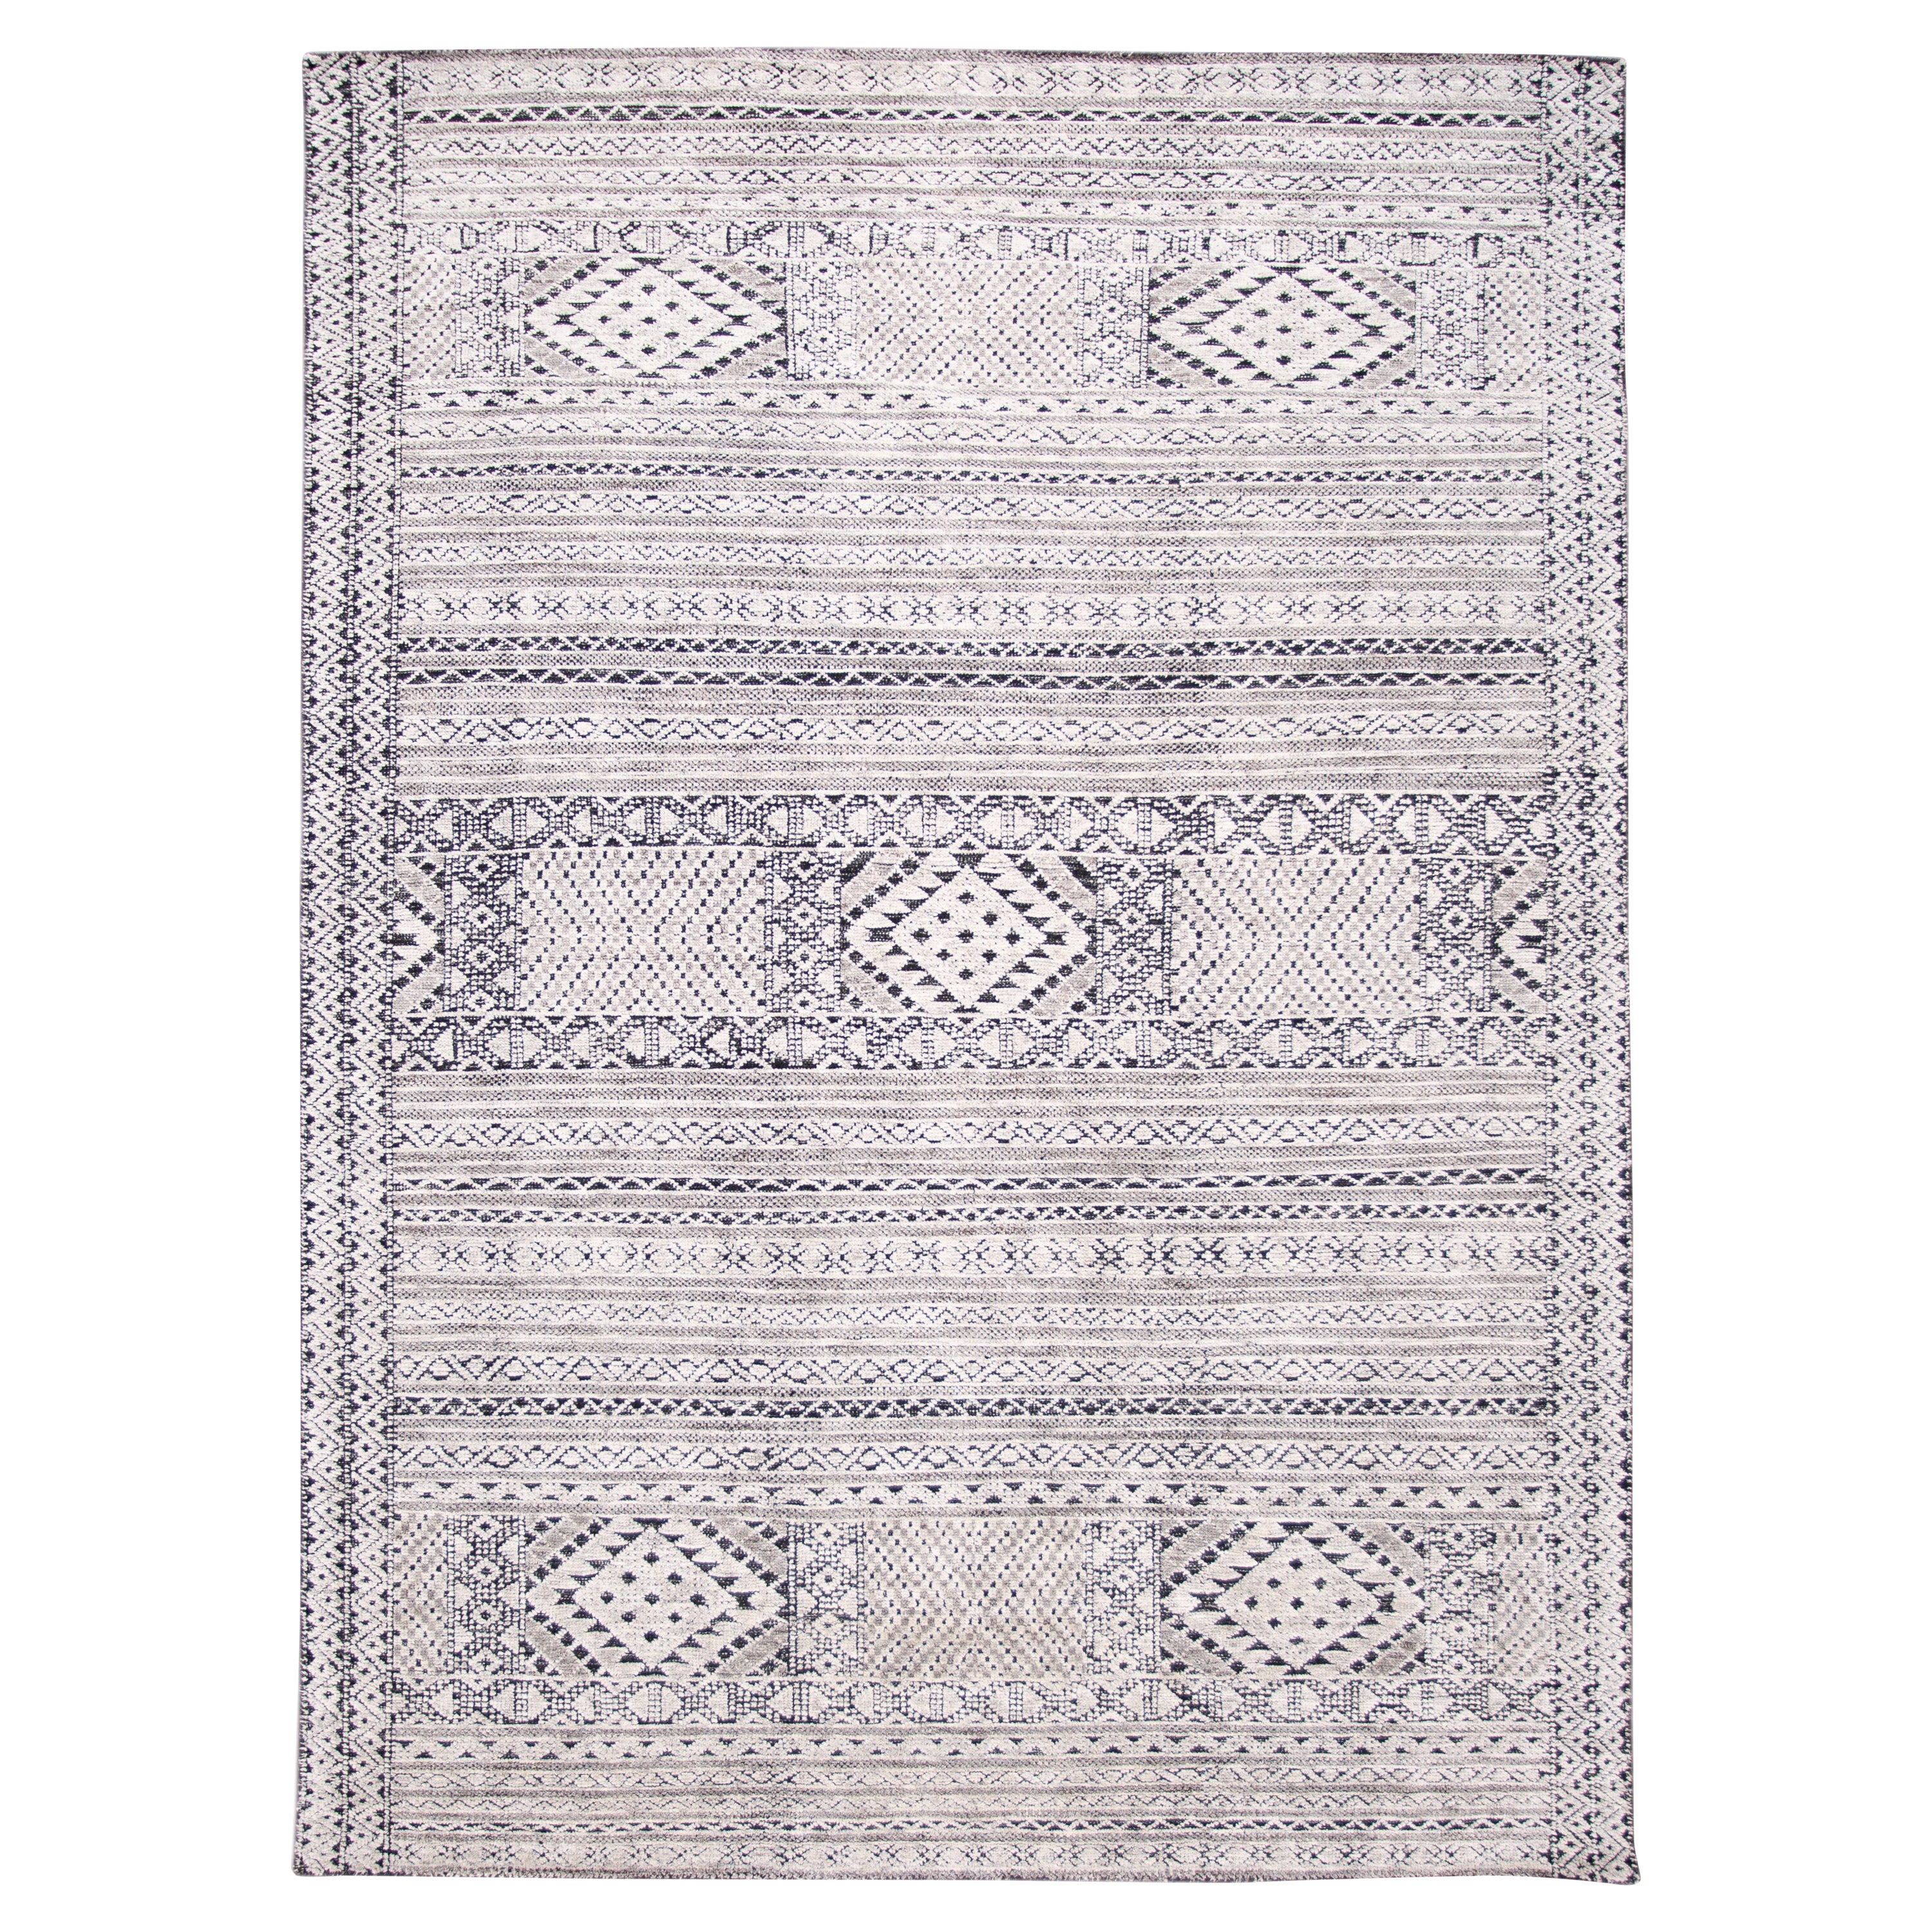 Modern Moroccan Style Wool Rug with Allover Design in Ivory & Gray